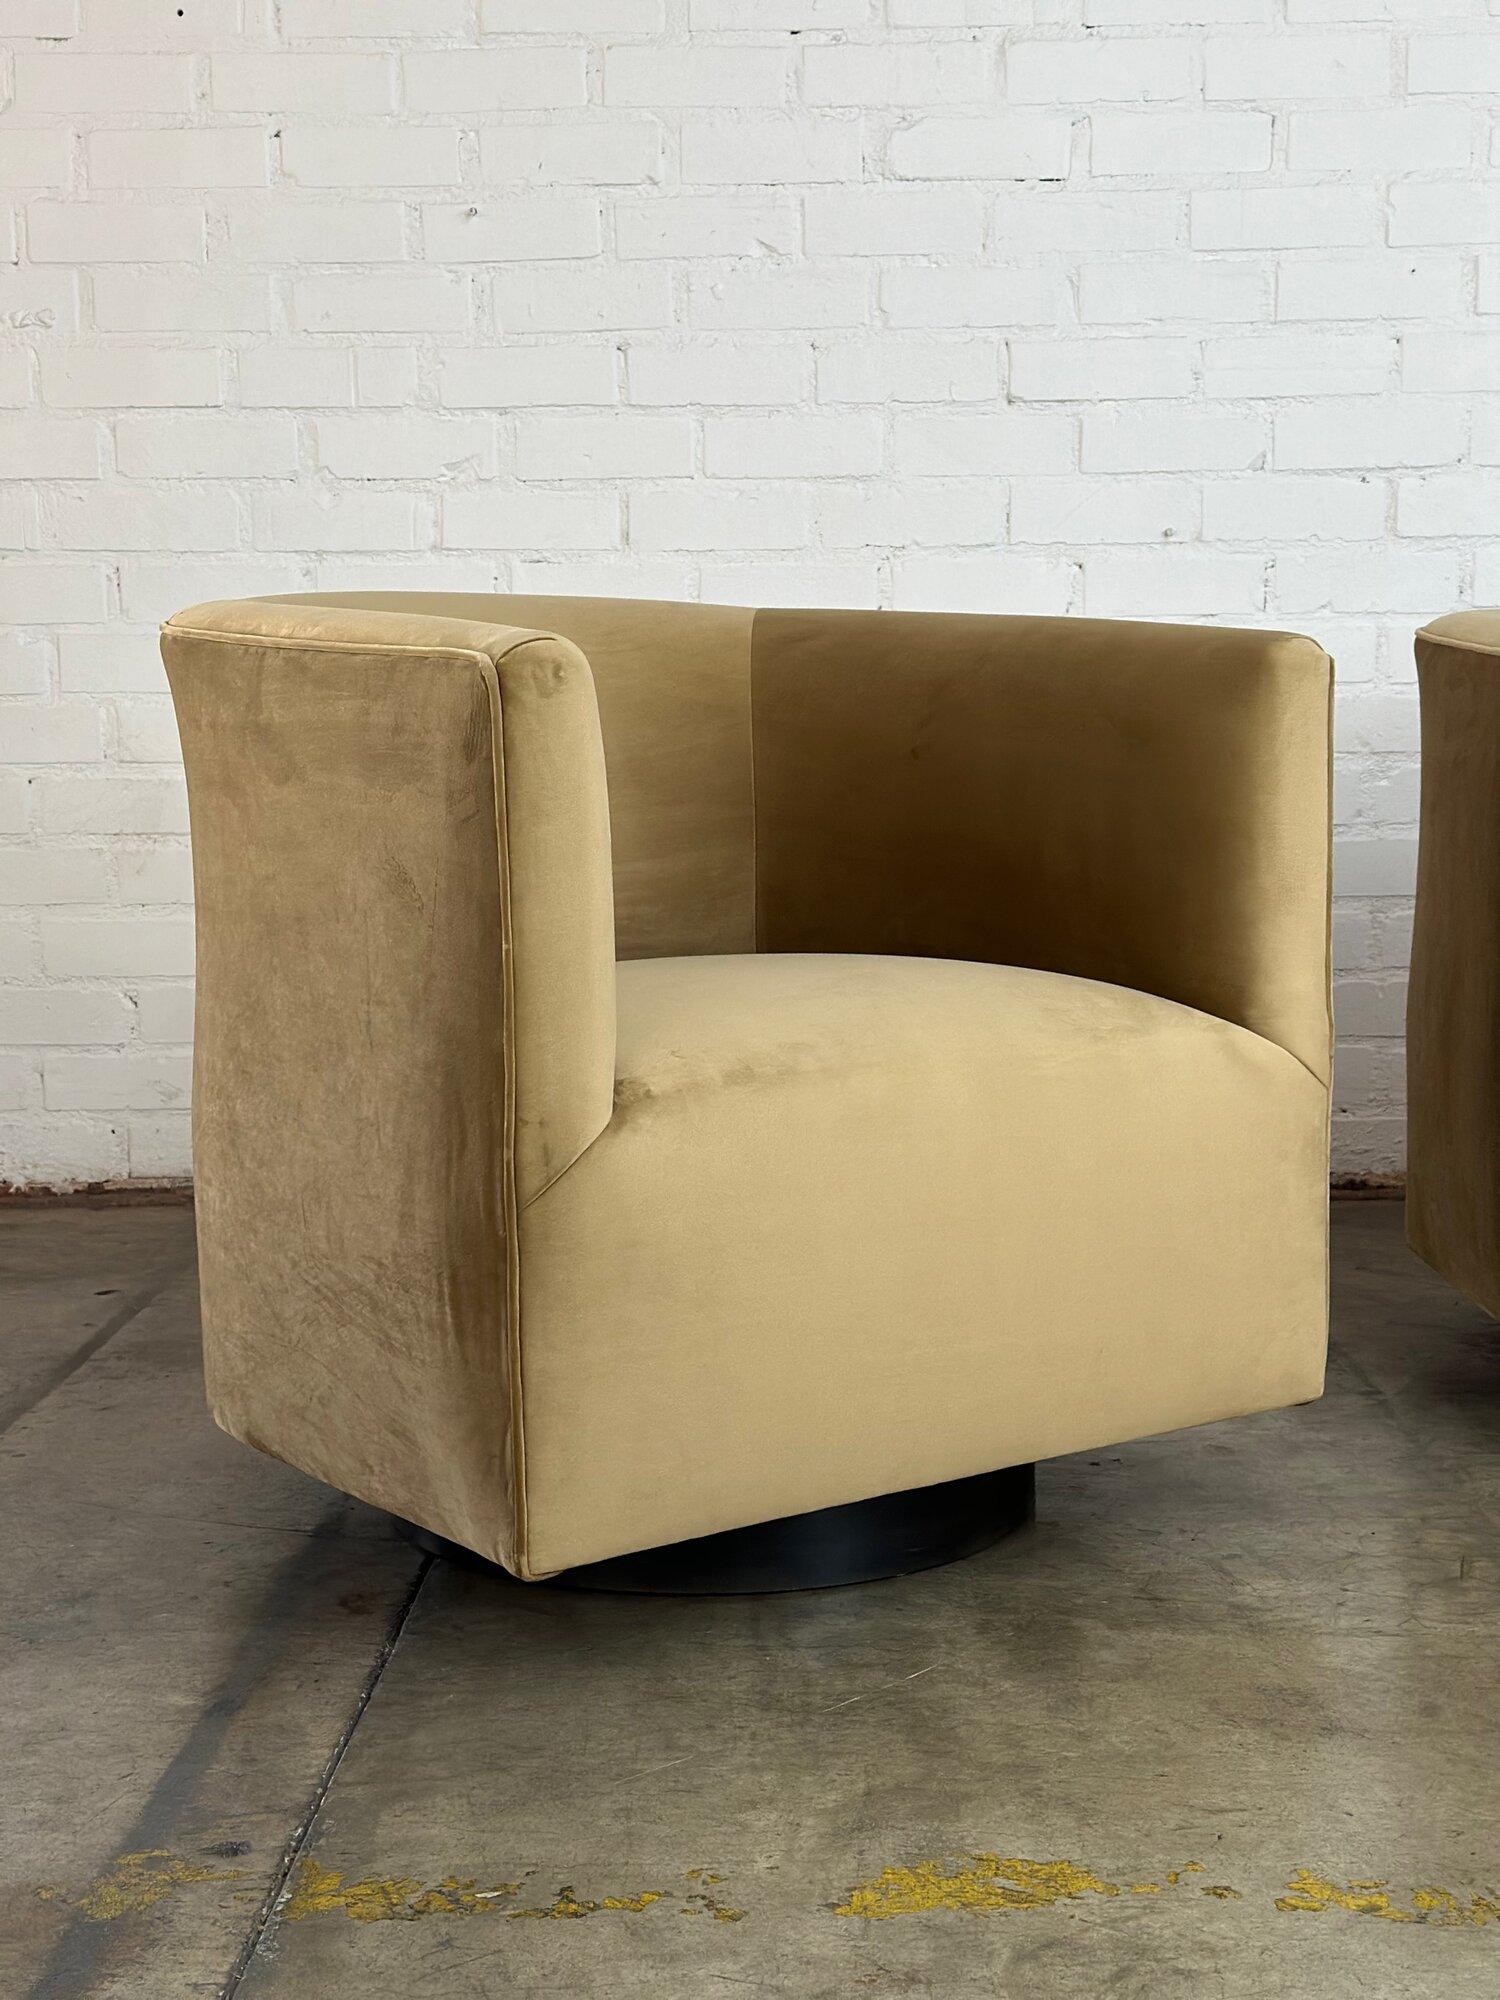 W33 D36 H31.5 SW23 SD23 SH18 AH30

Newly upholstered barrel swivel chairs on metal plinth bases. Metal swivel bases have a patinated bronze look and are in great condition with no visible large areas of wear. Each lounge chair is fully functional